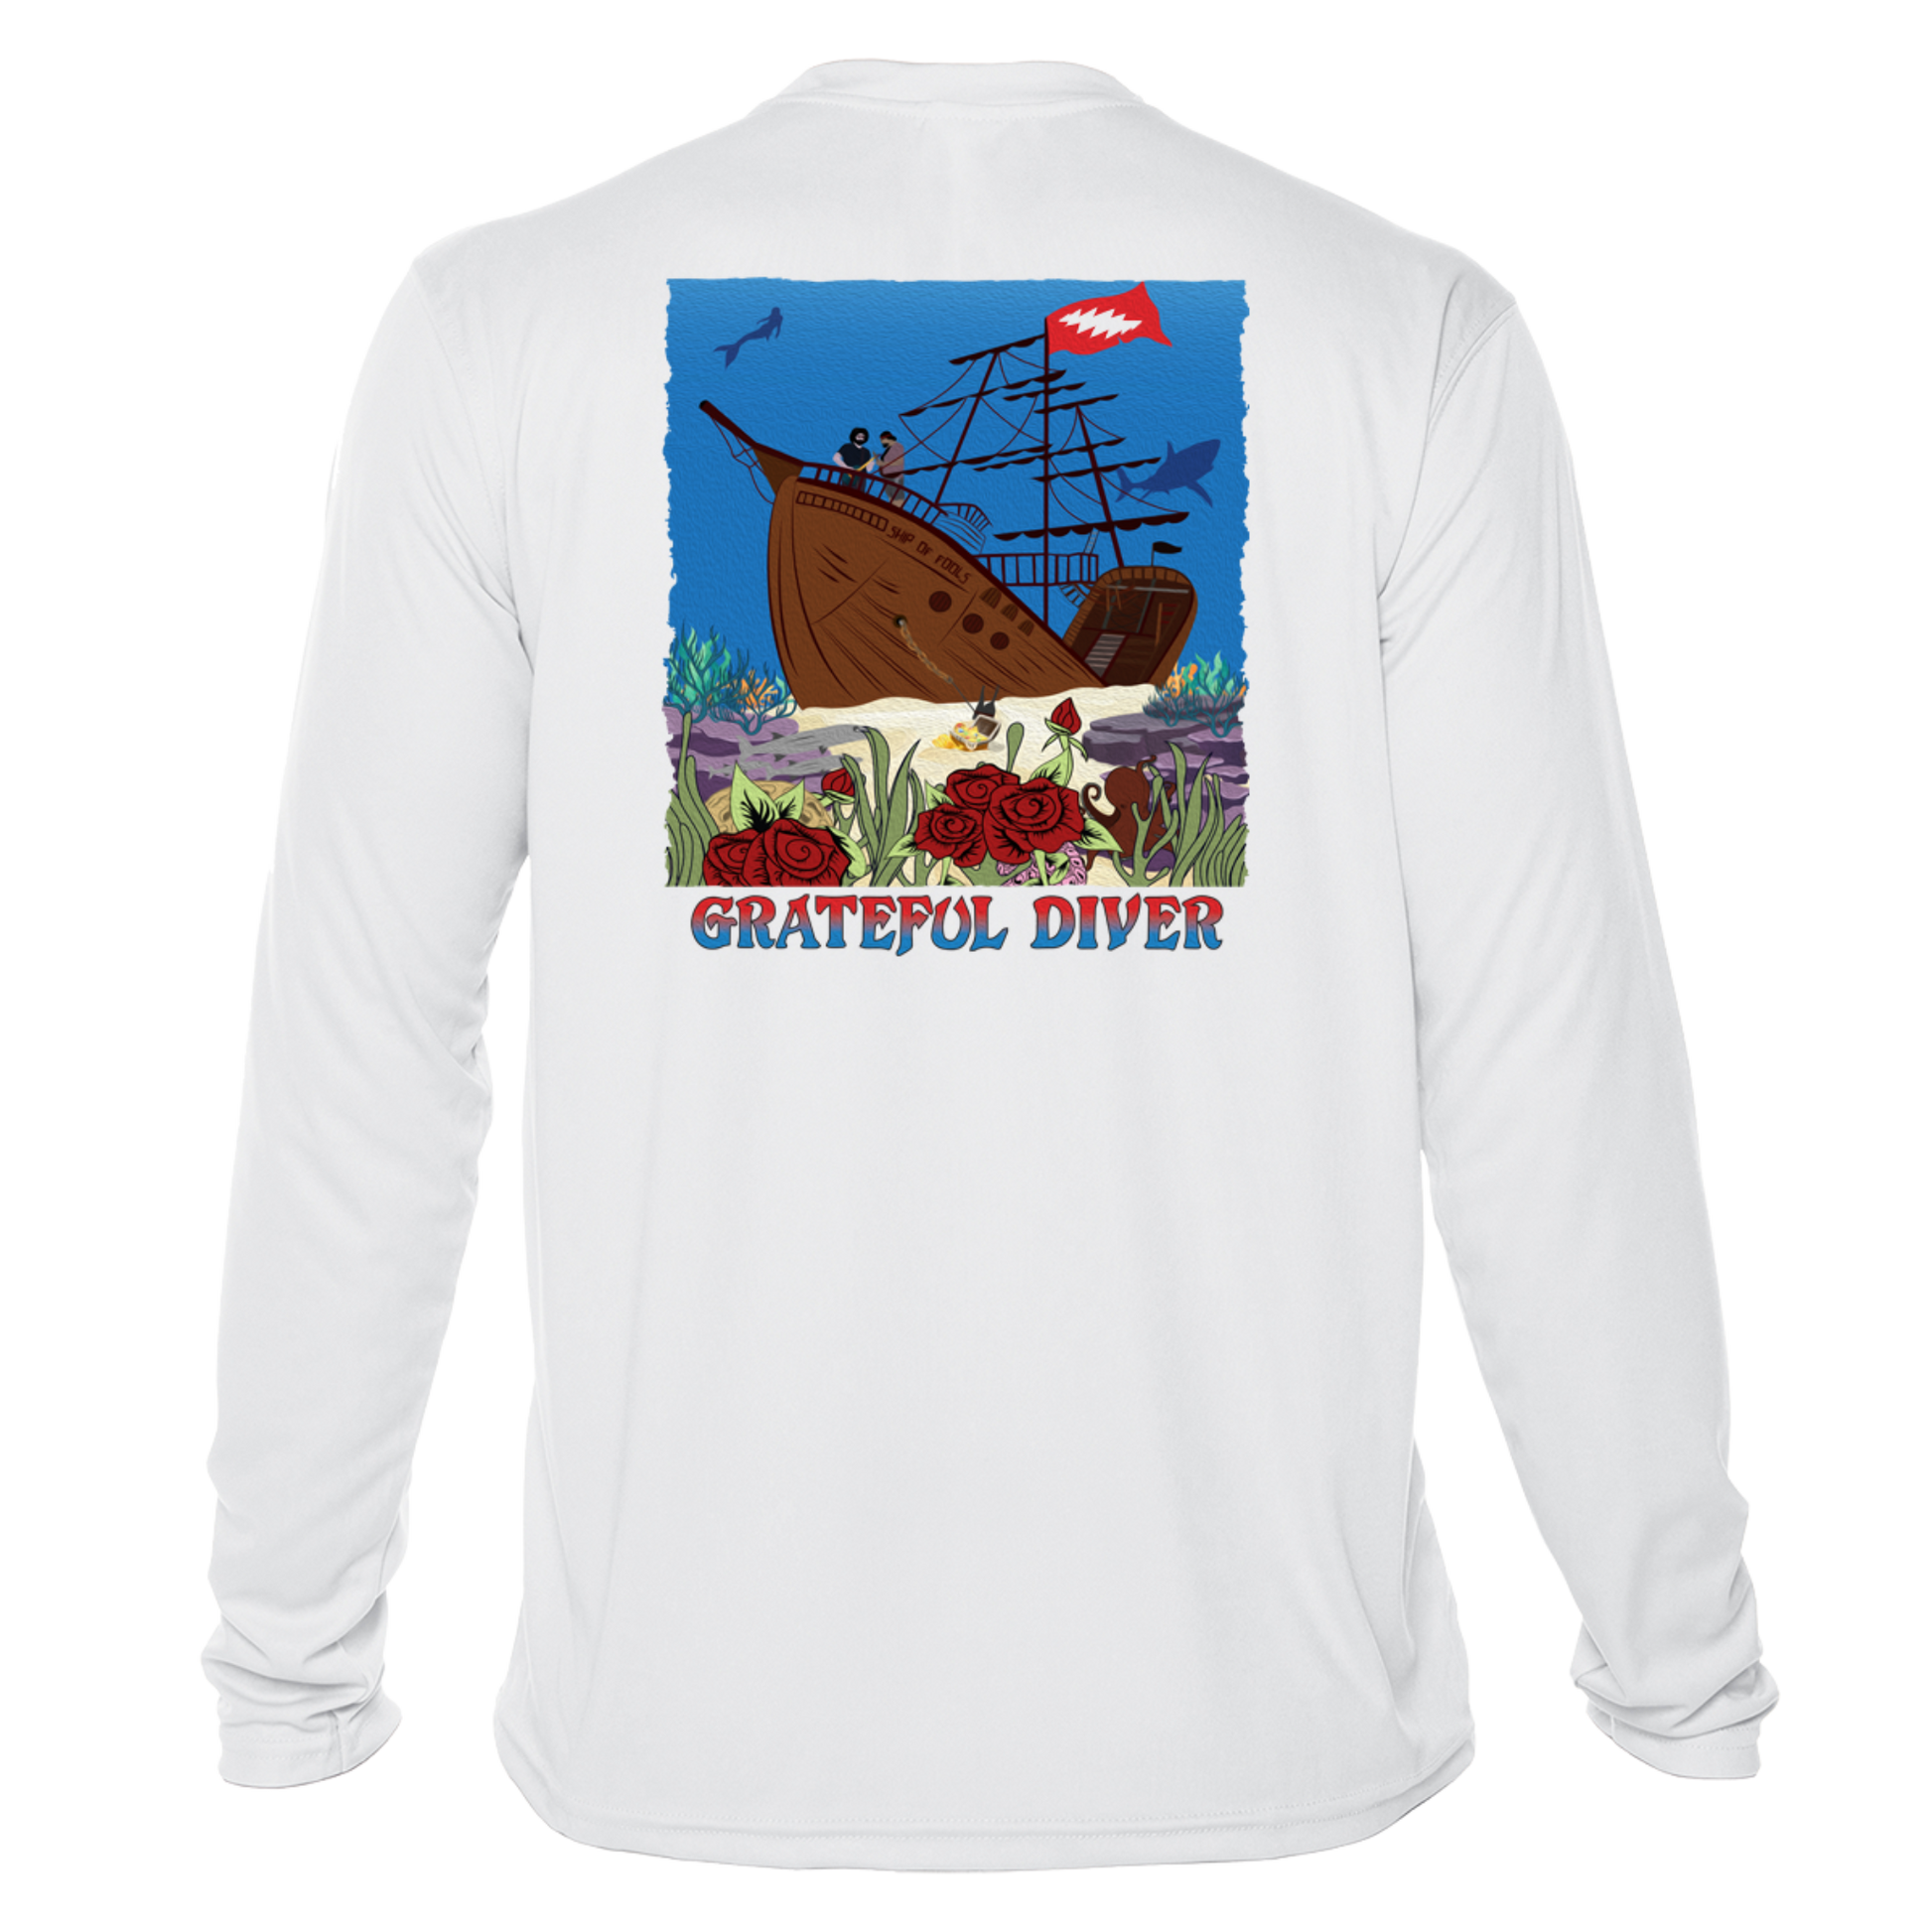 Grateful Diver Ship of Fools UV Shirt in white showing the back graphic